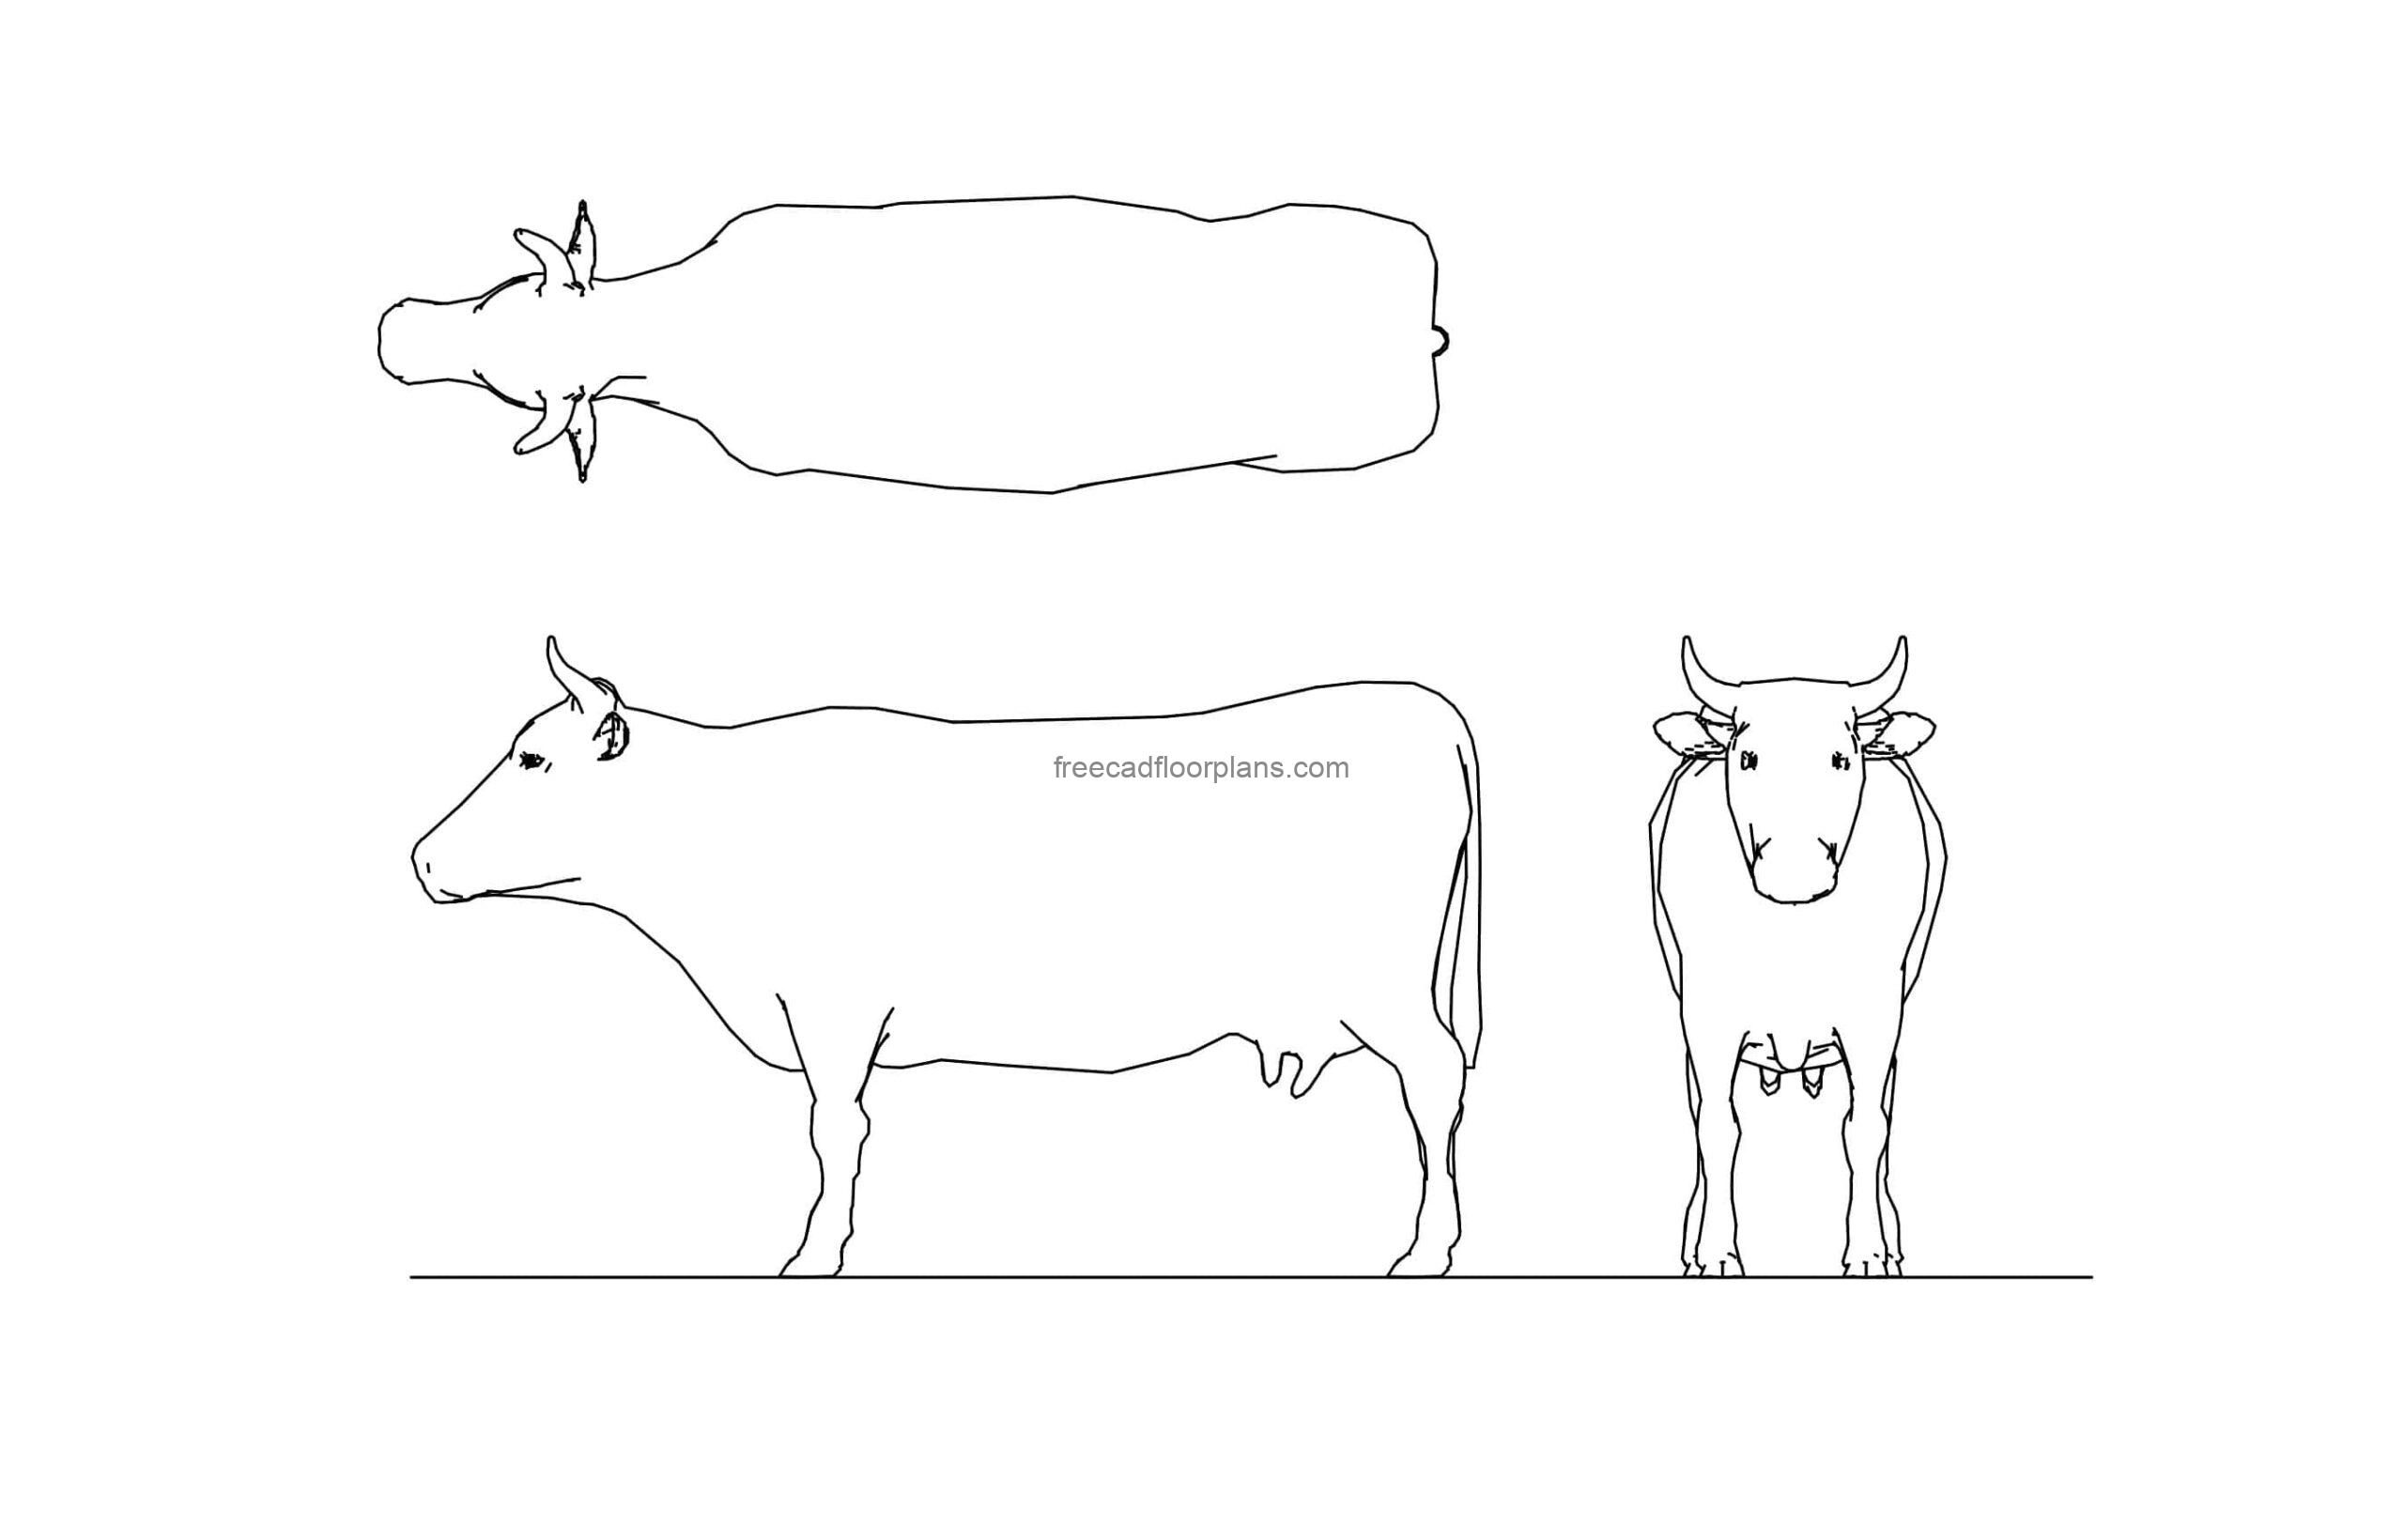 cow cad block drawing, plan and elevations file for free download